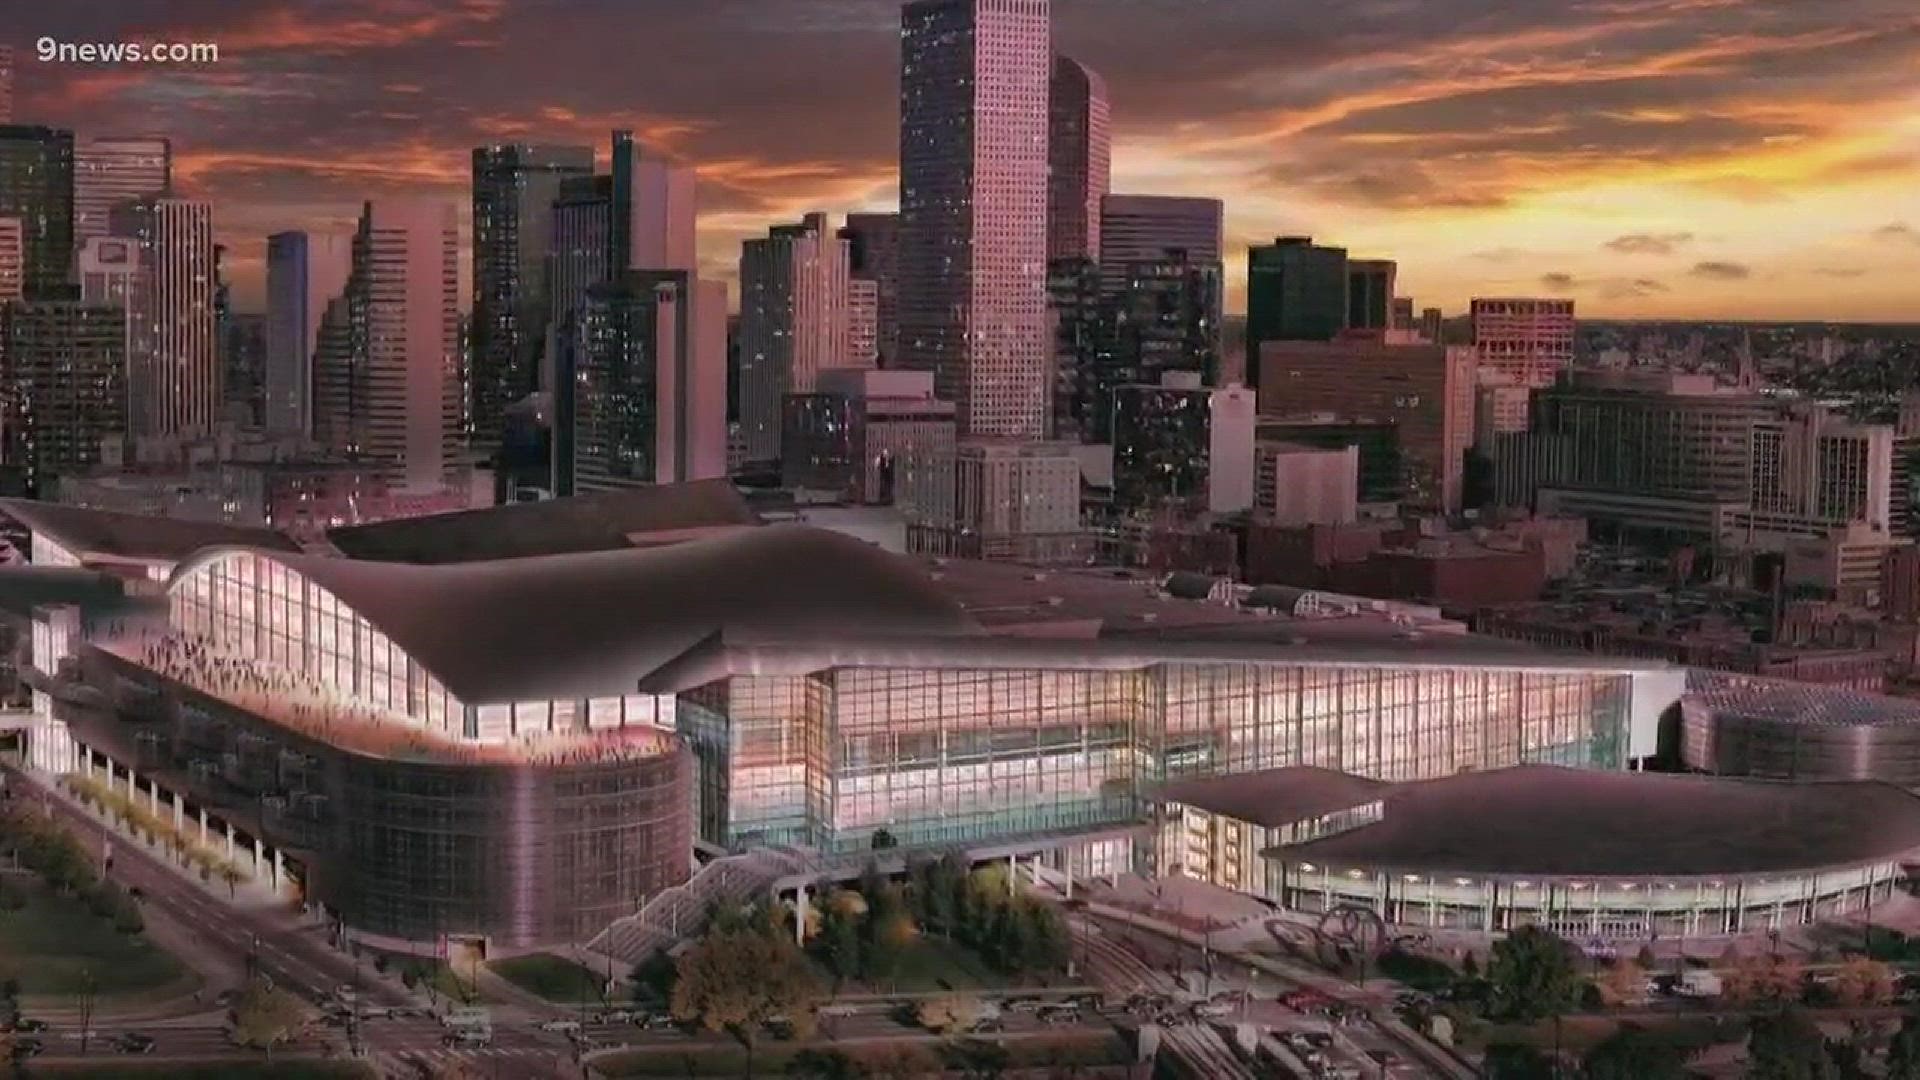 Denver is starting over with the Colorado Convention Center expansion project after the city discovered misconduct in the bidding process last year, and eventually fired one of the companies involved.